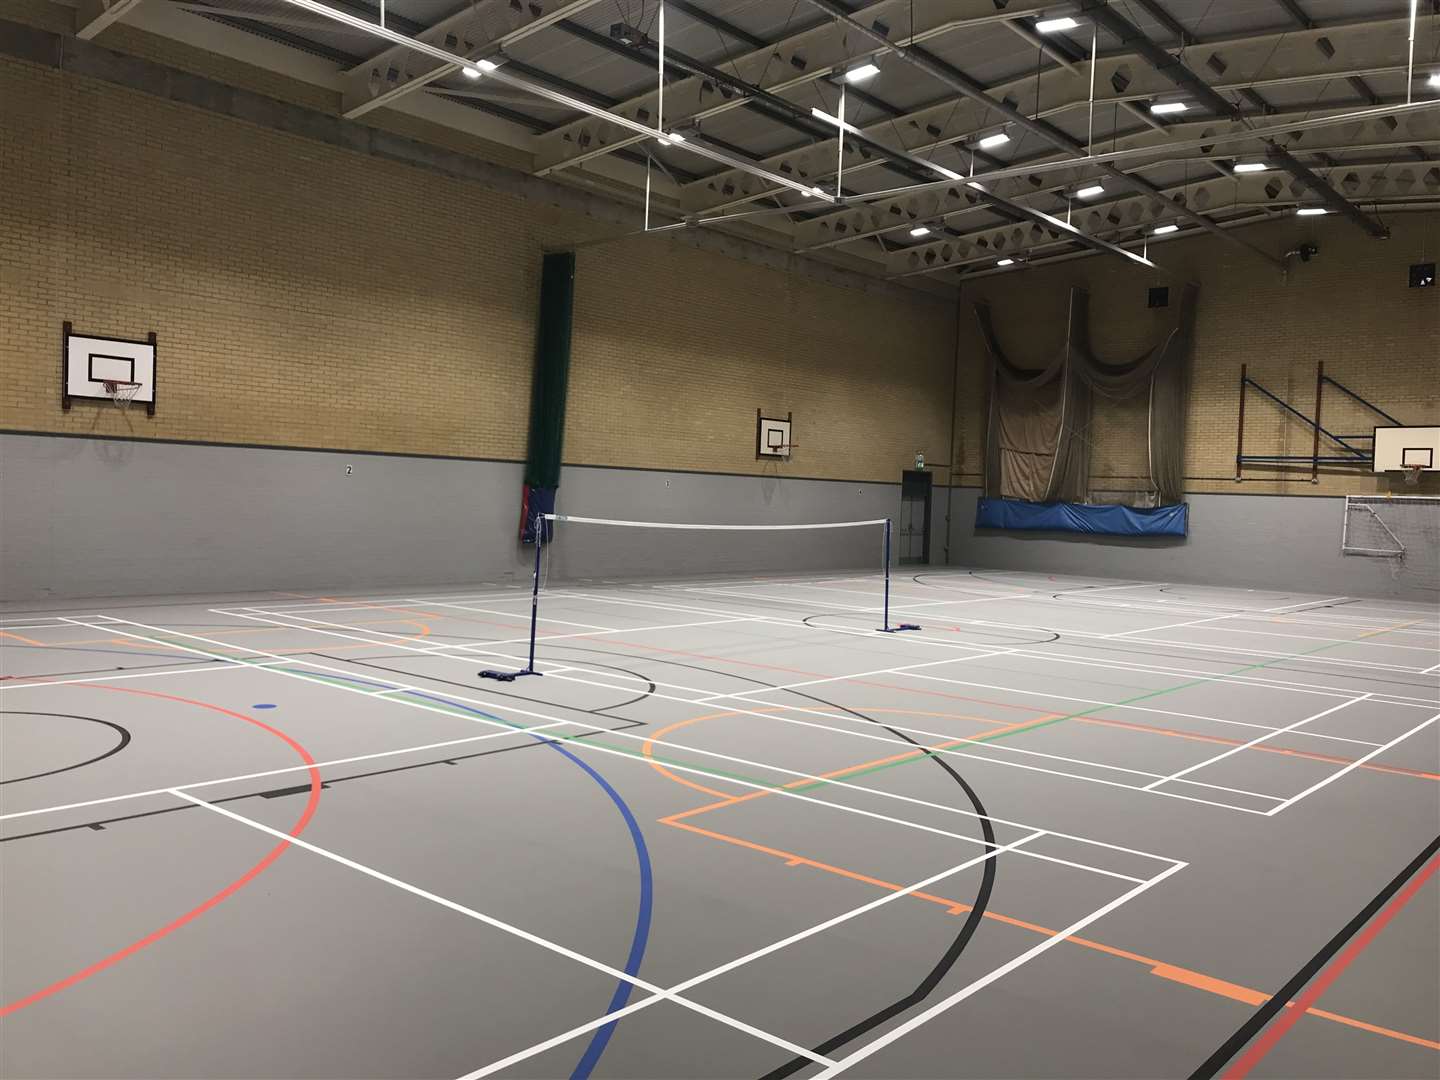 The sports hall floor at Sandwich Leisure Centre has been replaced as part of the improvements programme